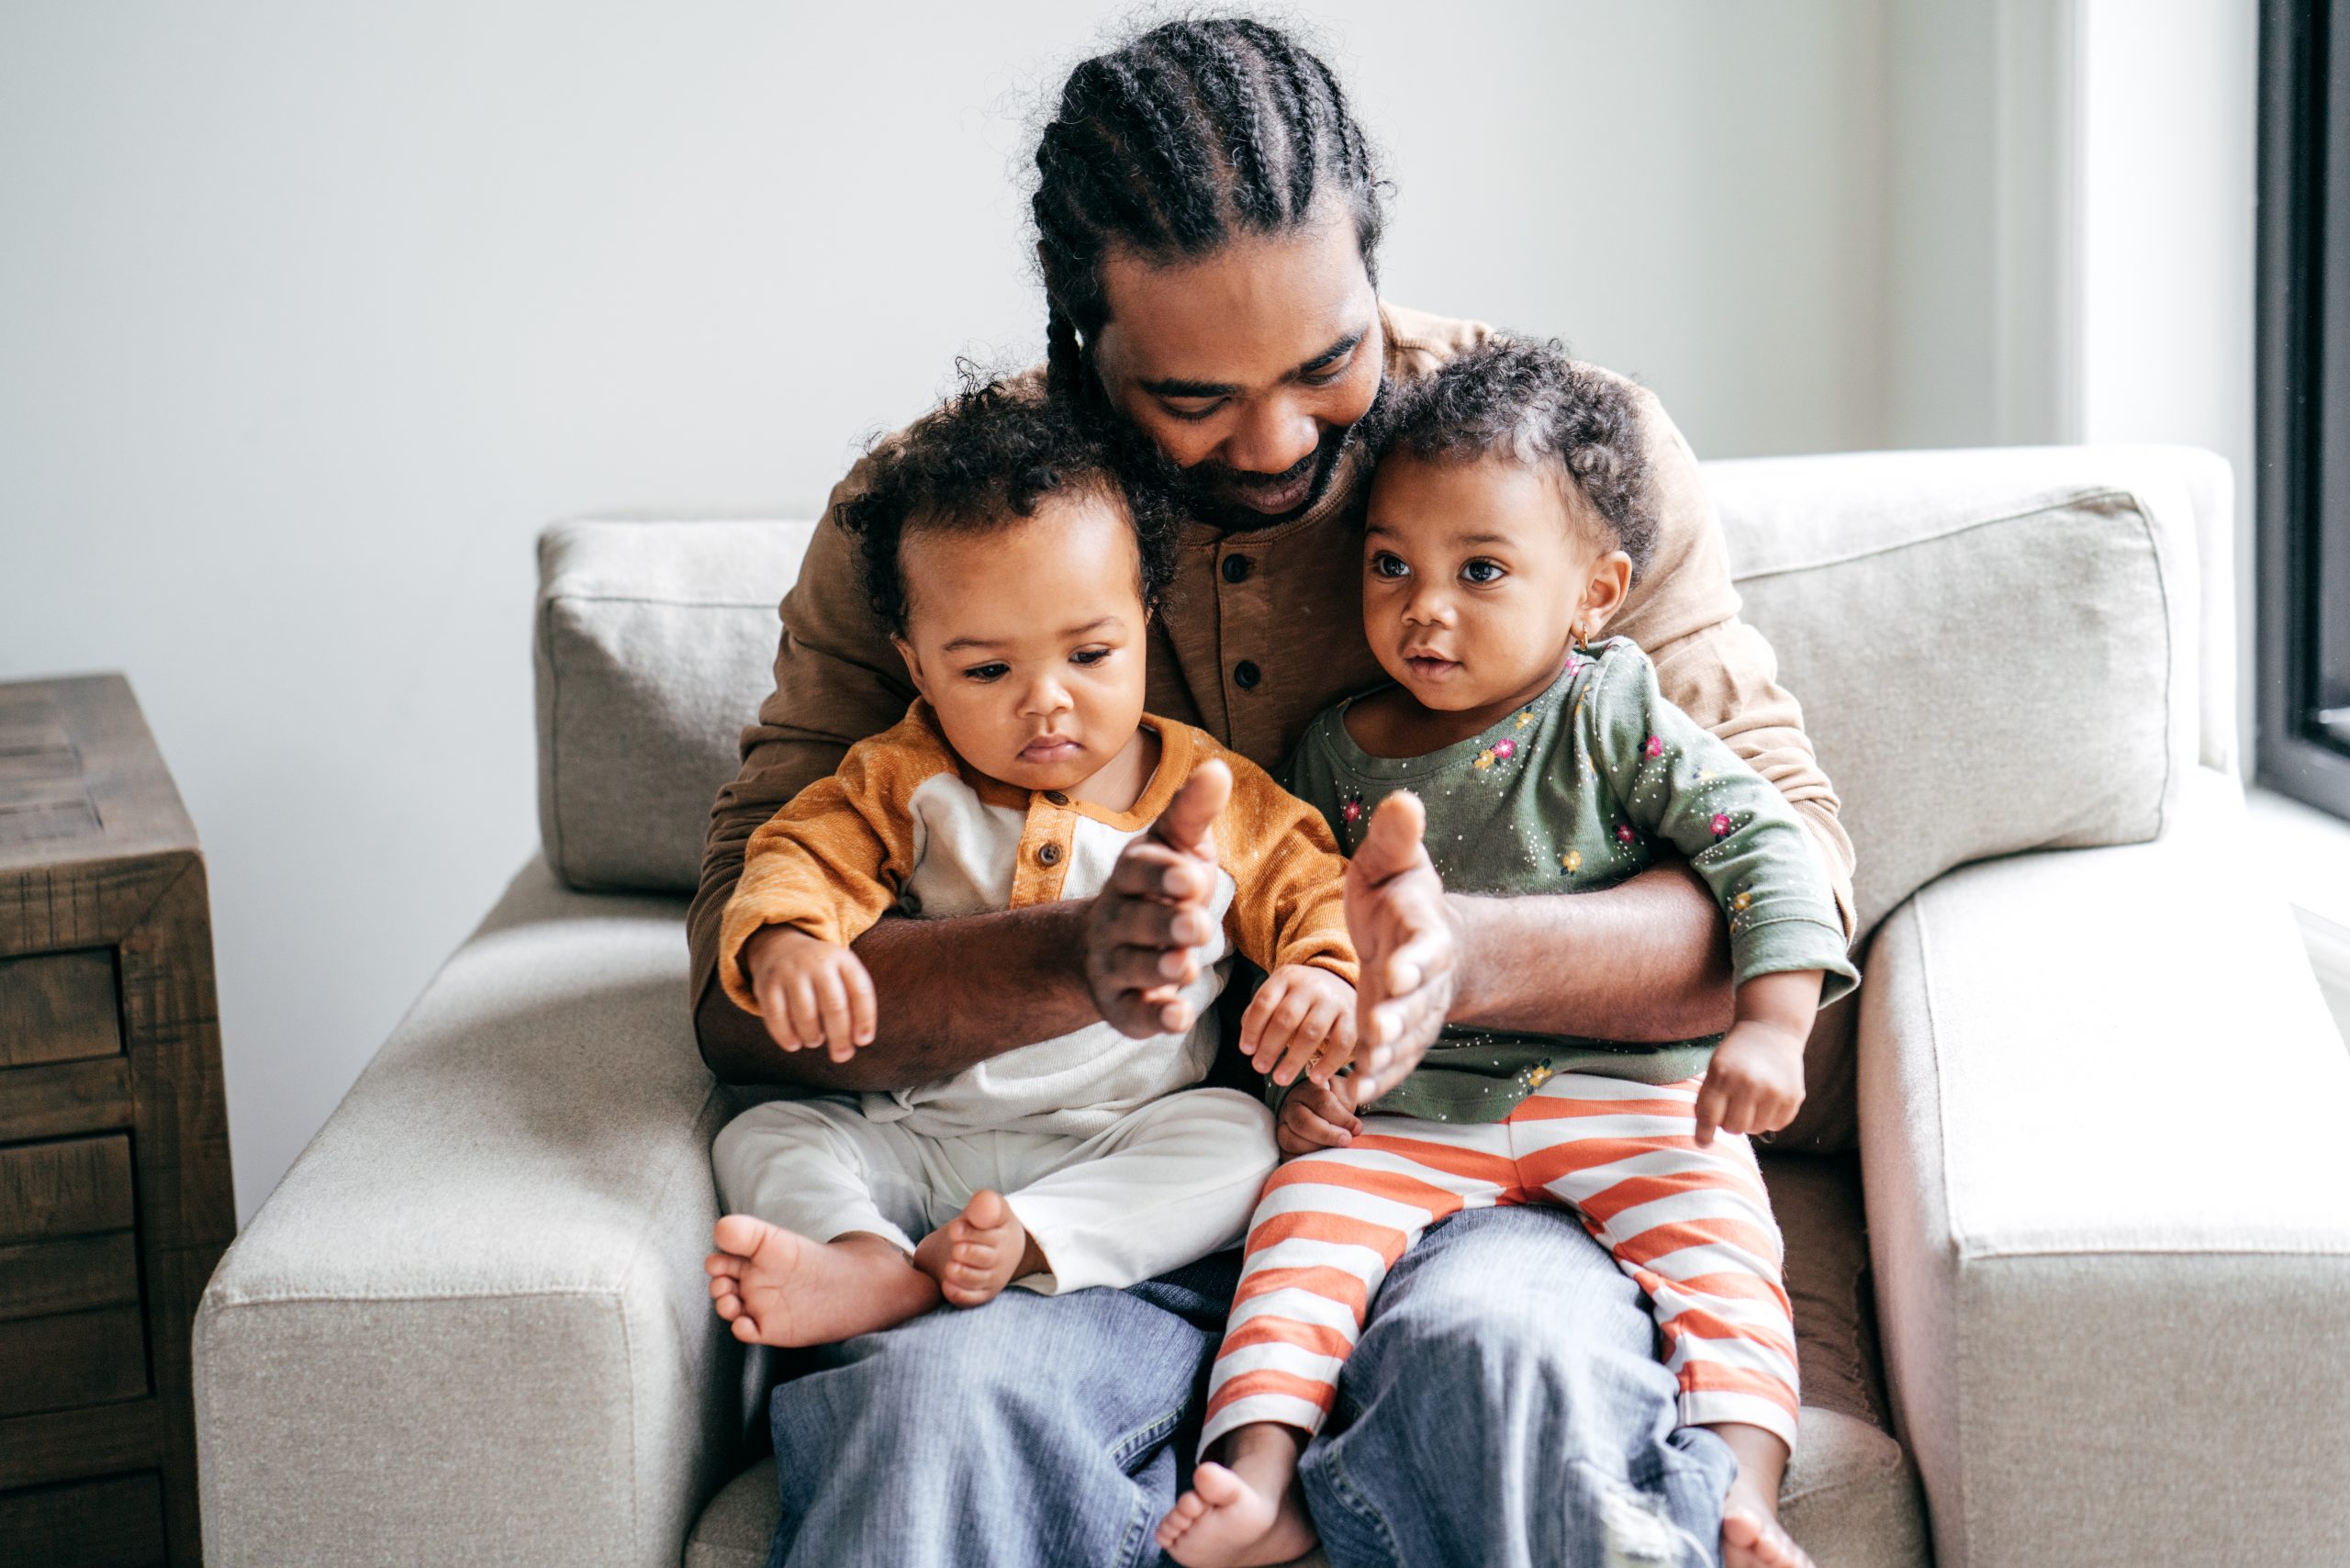 A Black father cuddles his two young children on a couch.